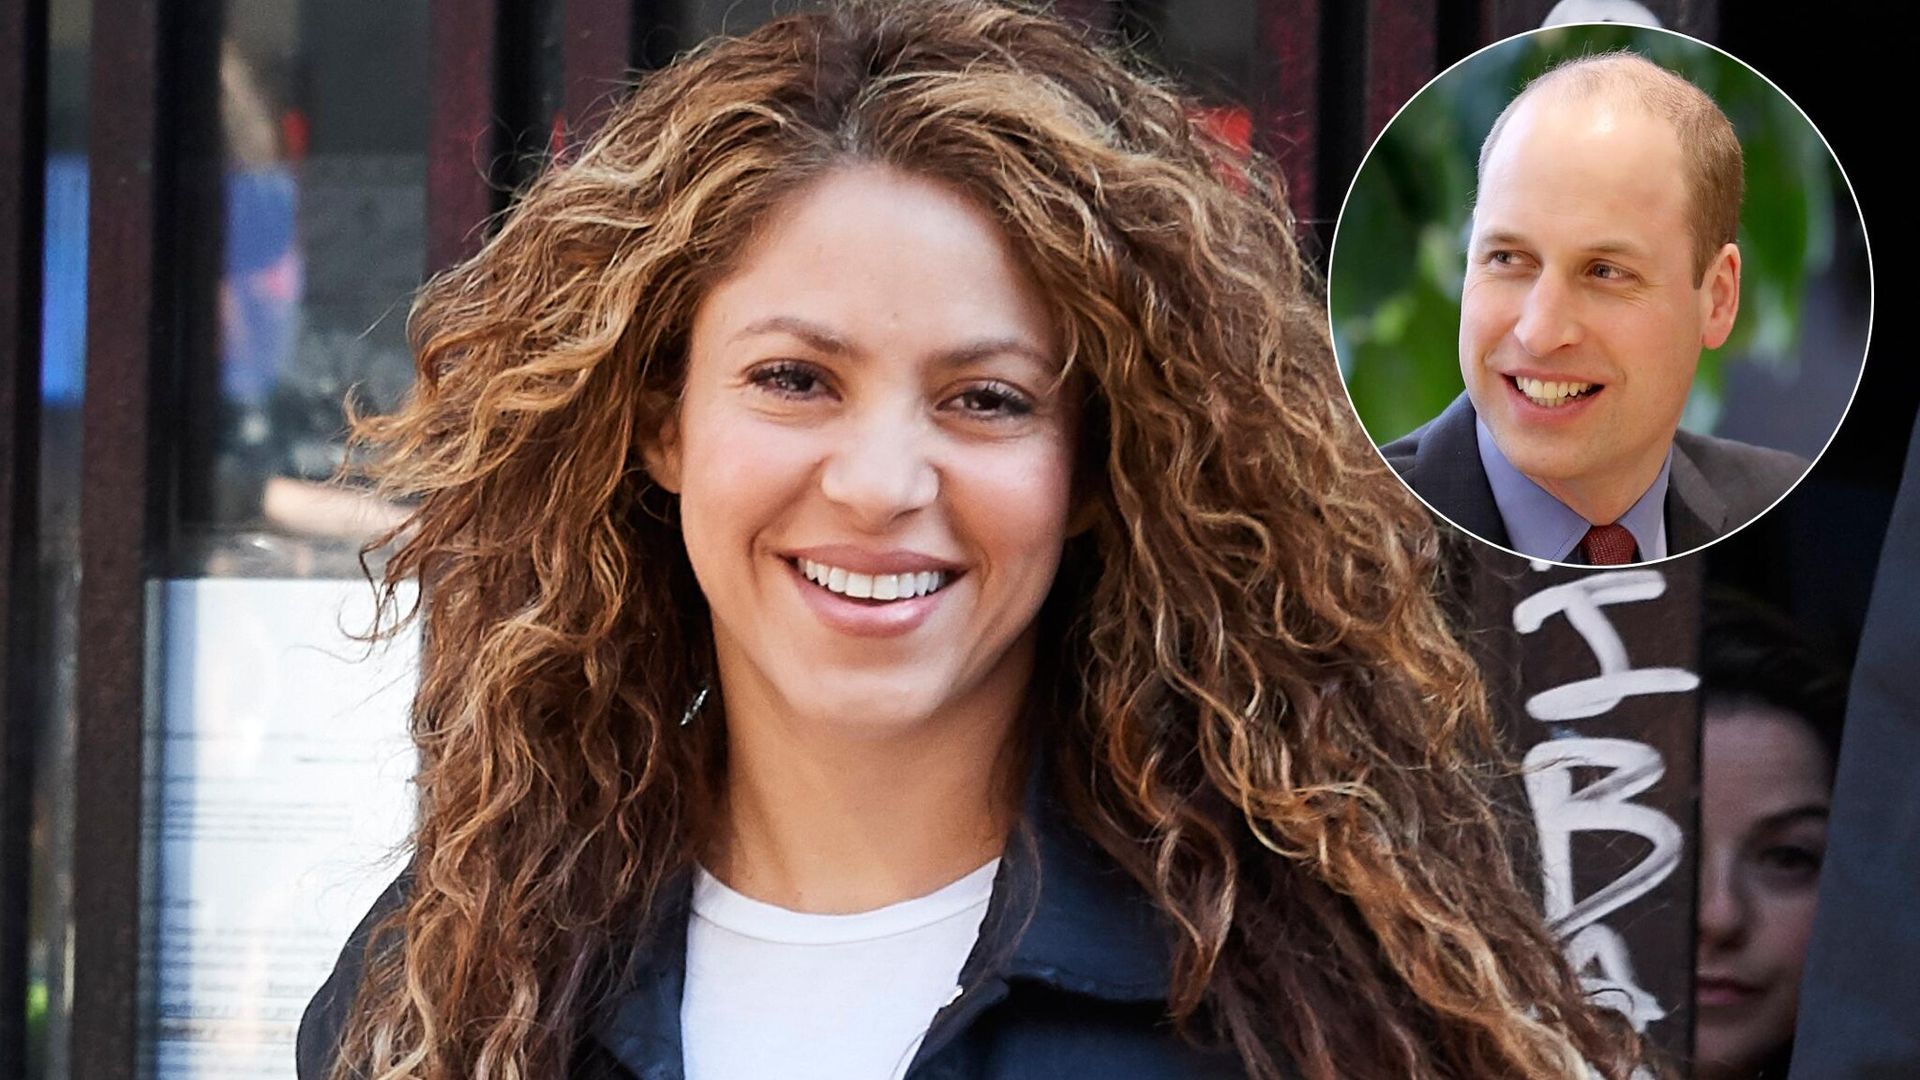 Shakira is teaming up with Prince William for an important cause